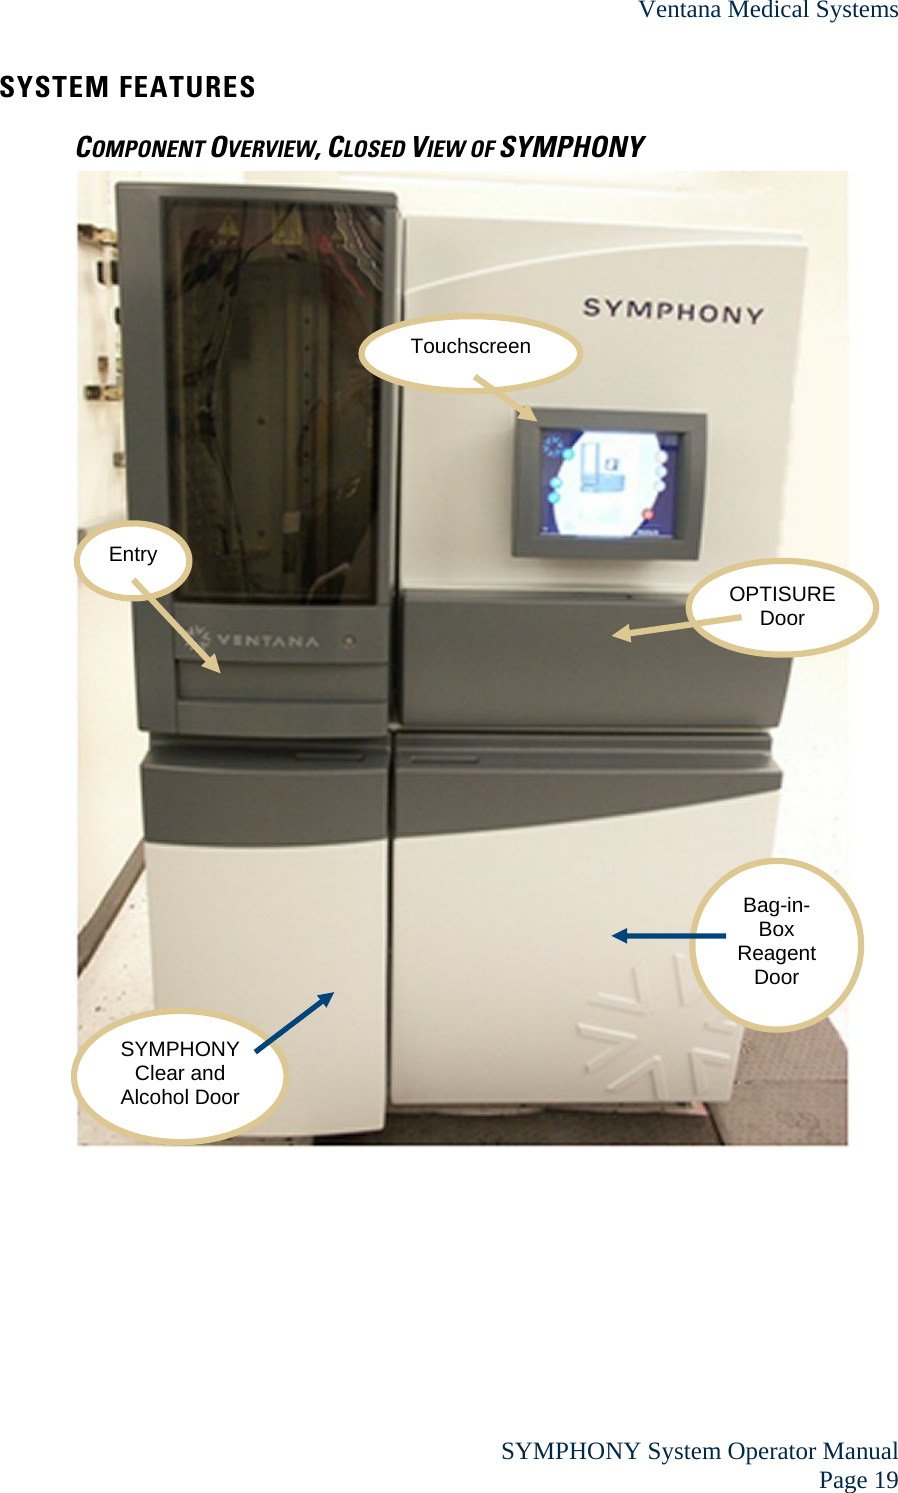 Ventana Medical Systems  SYMPHONY System Operator Manual Page 19 SYSTEM FEATURES COMPONENT OVERVIEW, CLOSED VIEW OF SYMPHONY   Bag-in-Box Reagent Door SYMPHONY Clear and Alcohol Door OPTISURE Door TouchscreenEntry